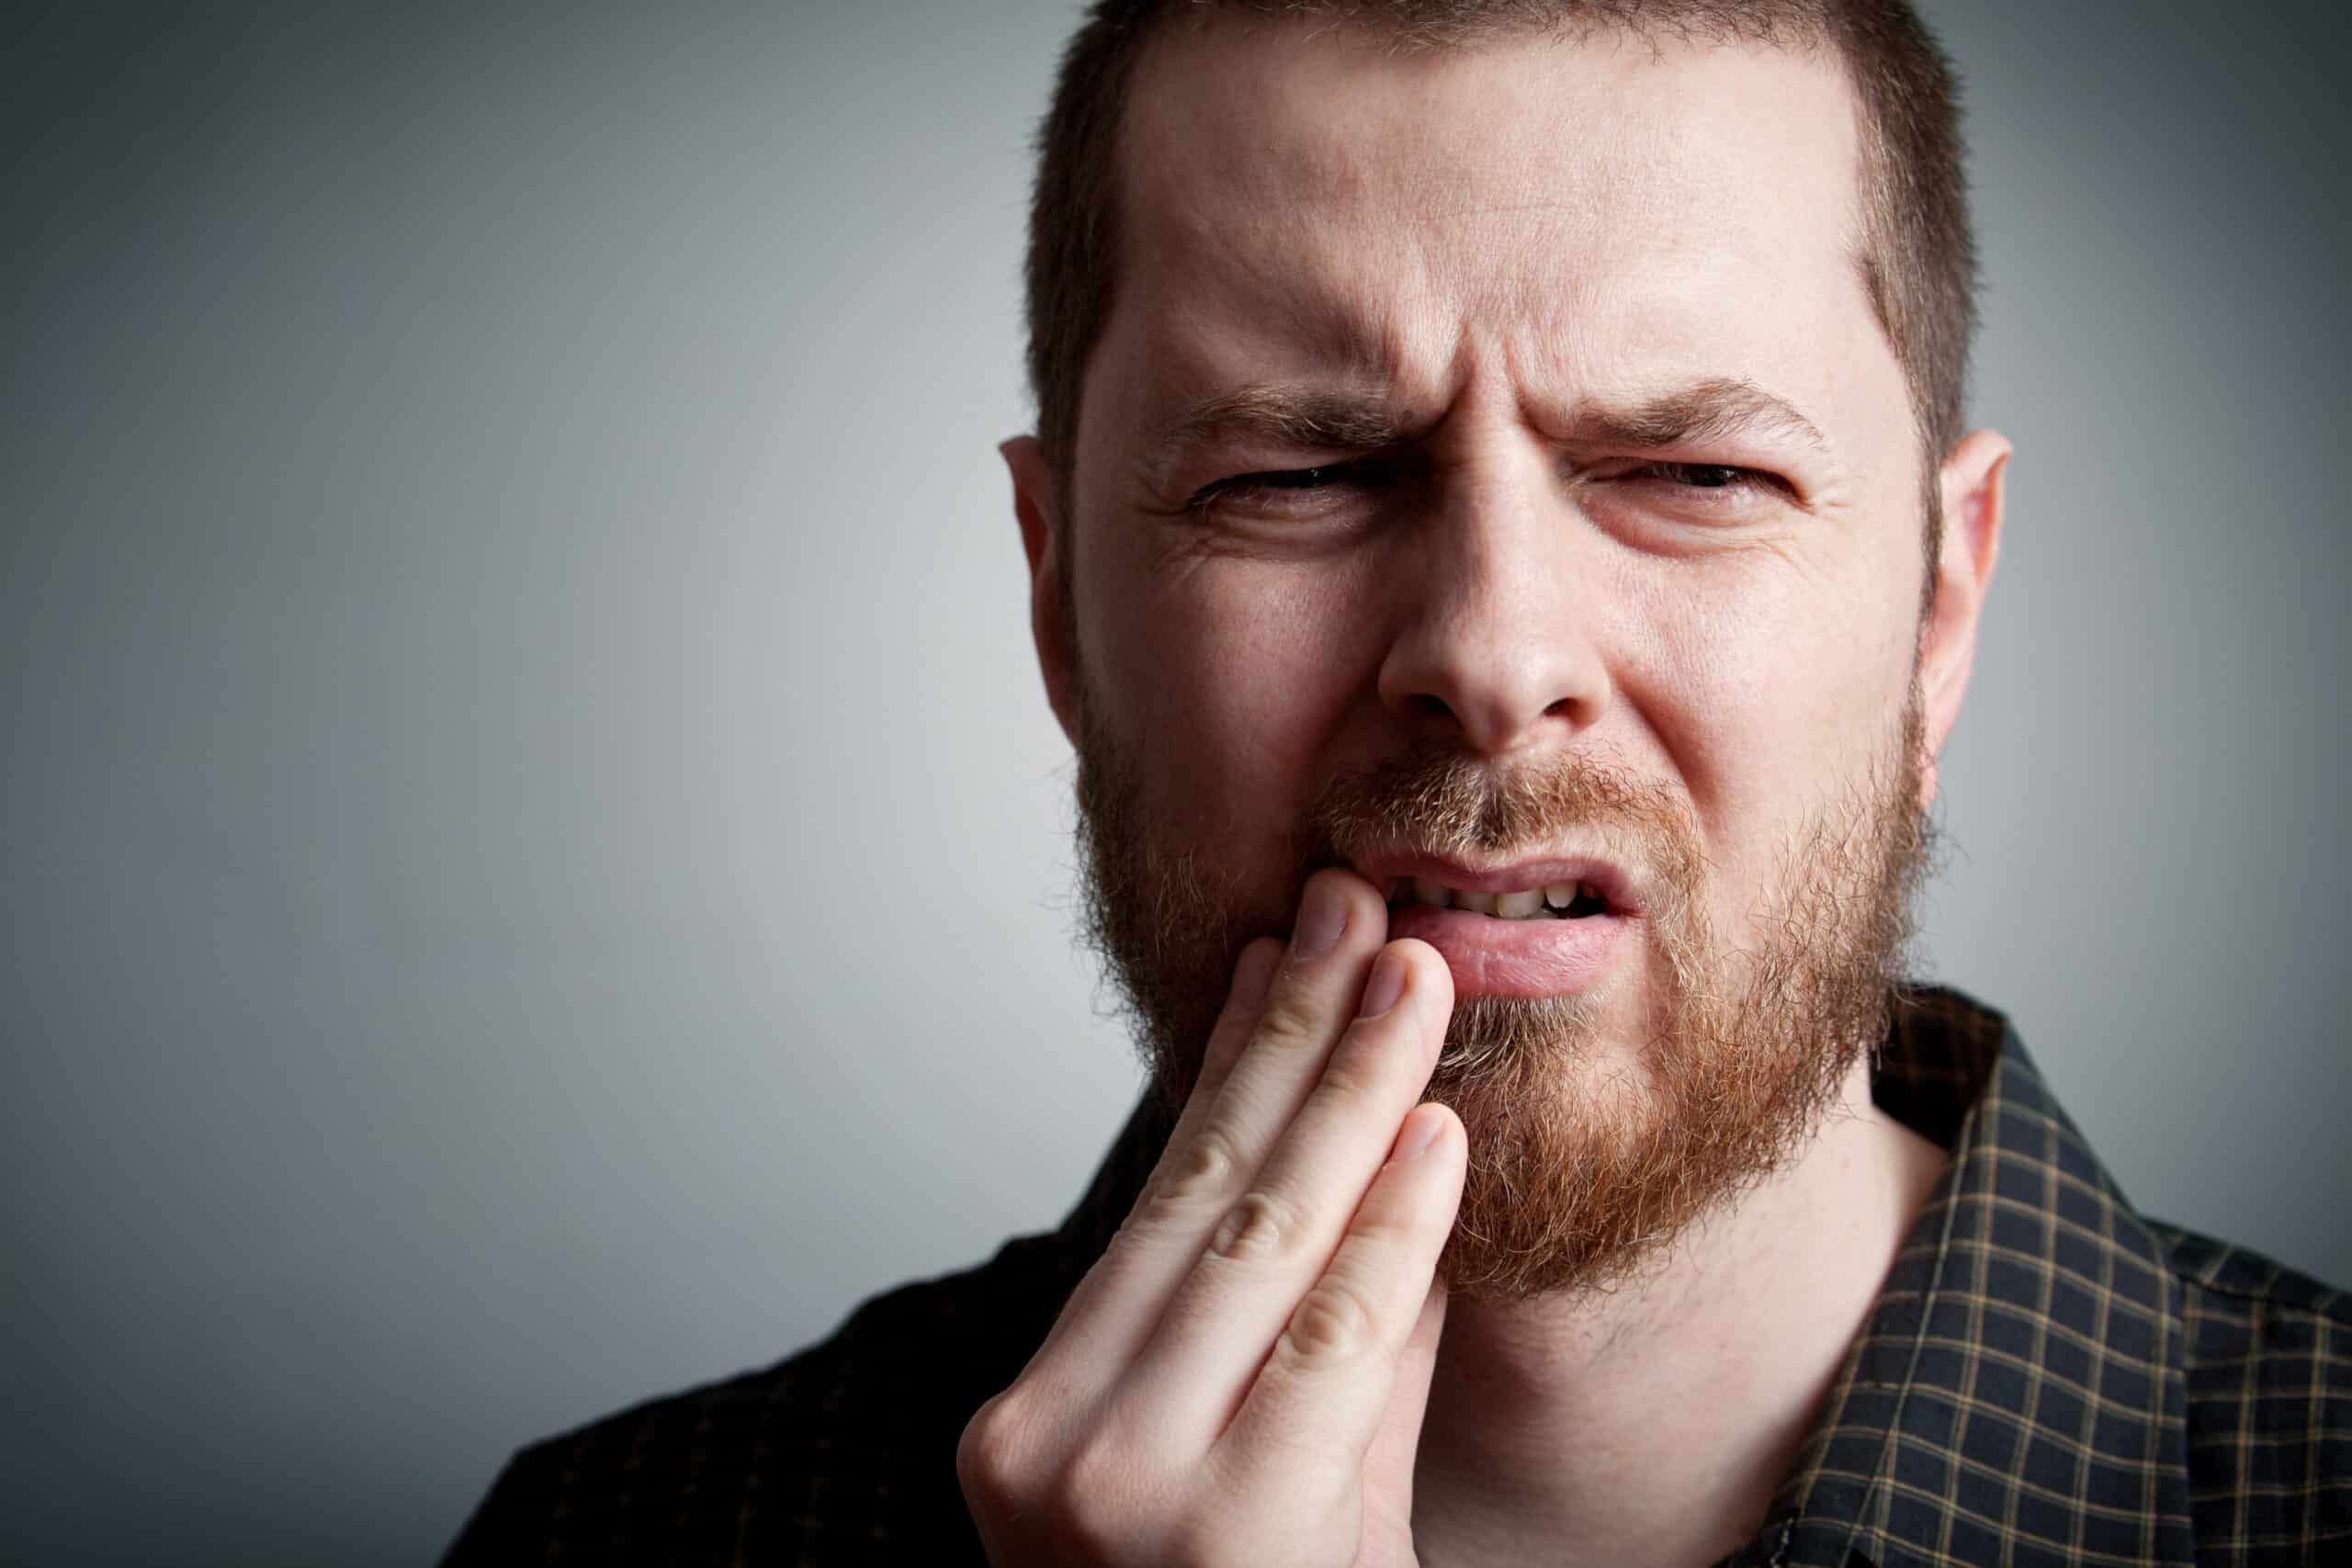 Cankers And Cold Sores: Symptoms, Treatments, And Other Great Info